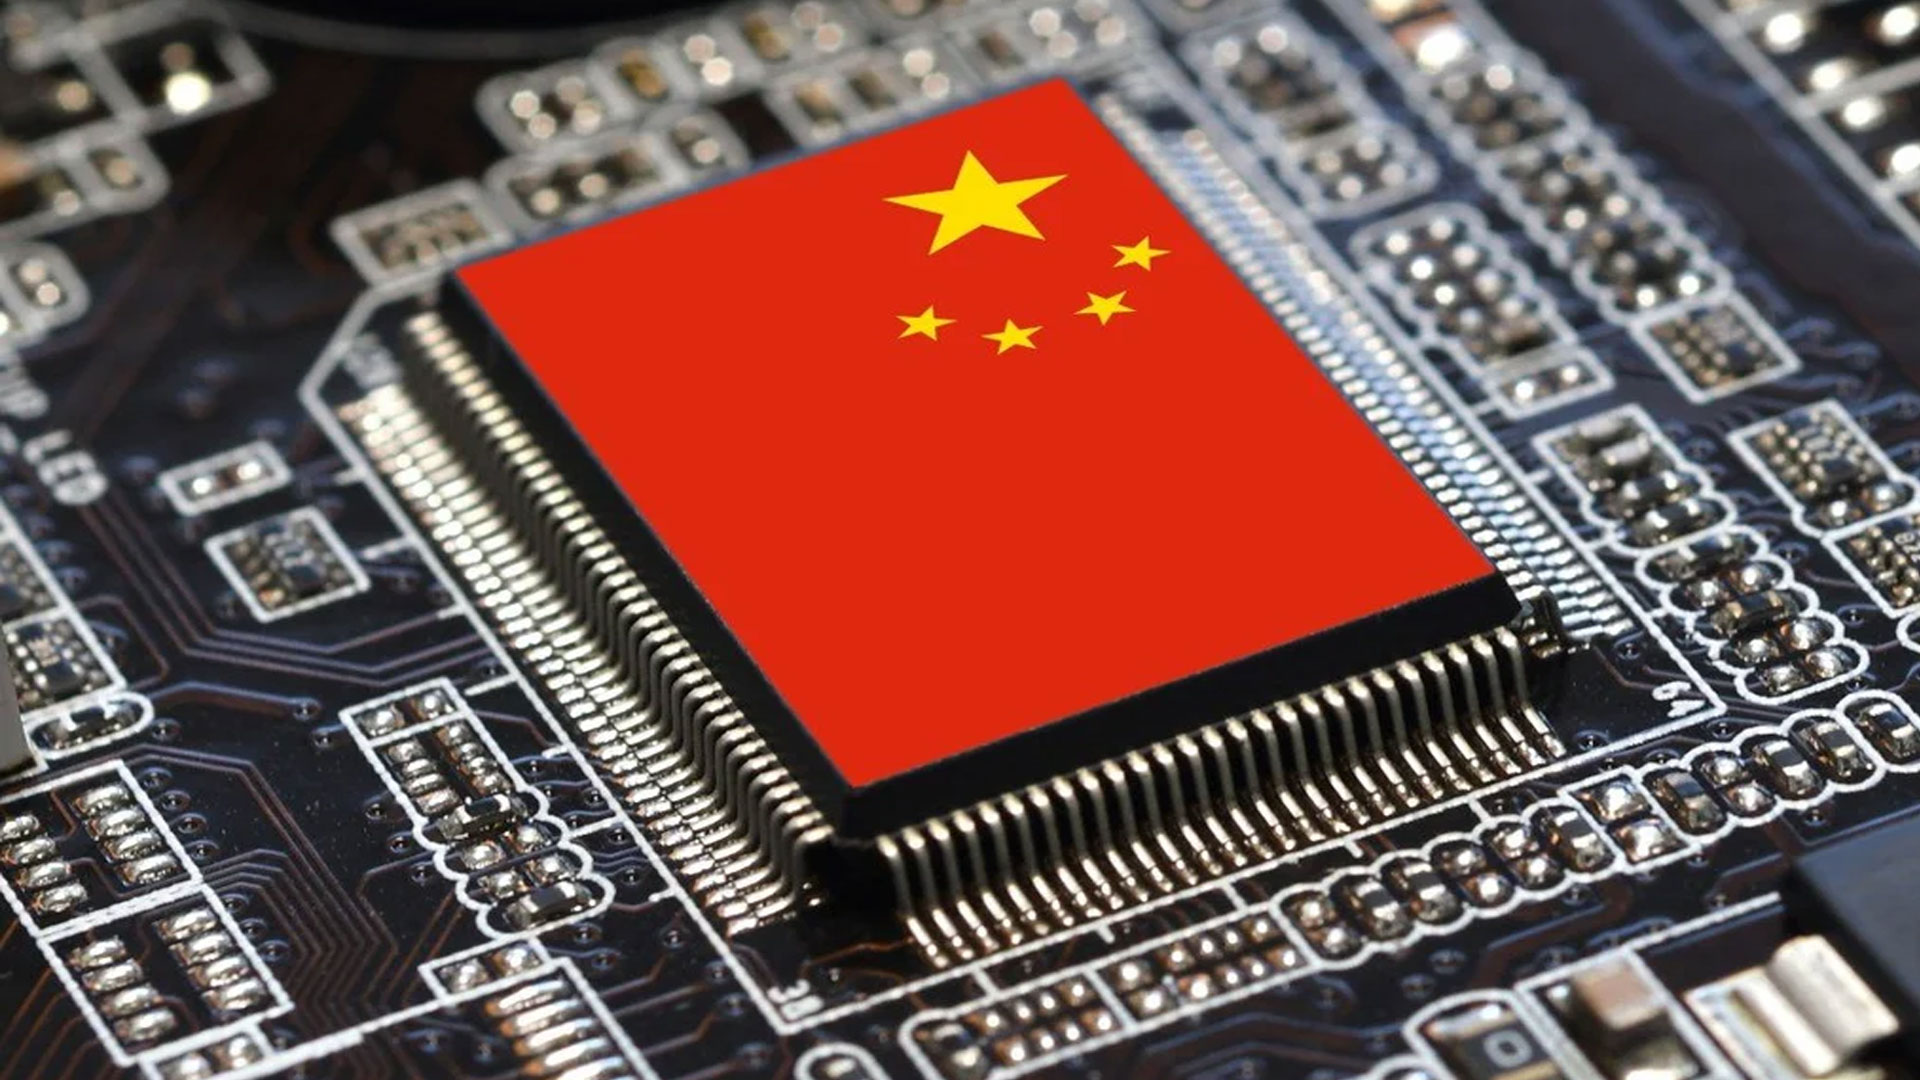 USA vs. China: The chip war also includes software